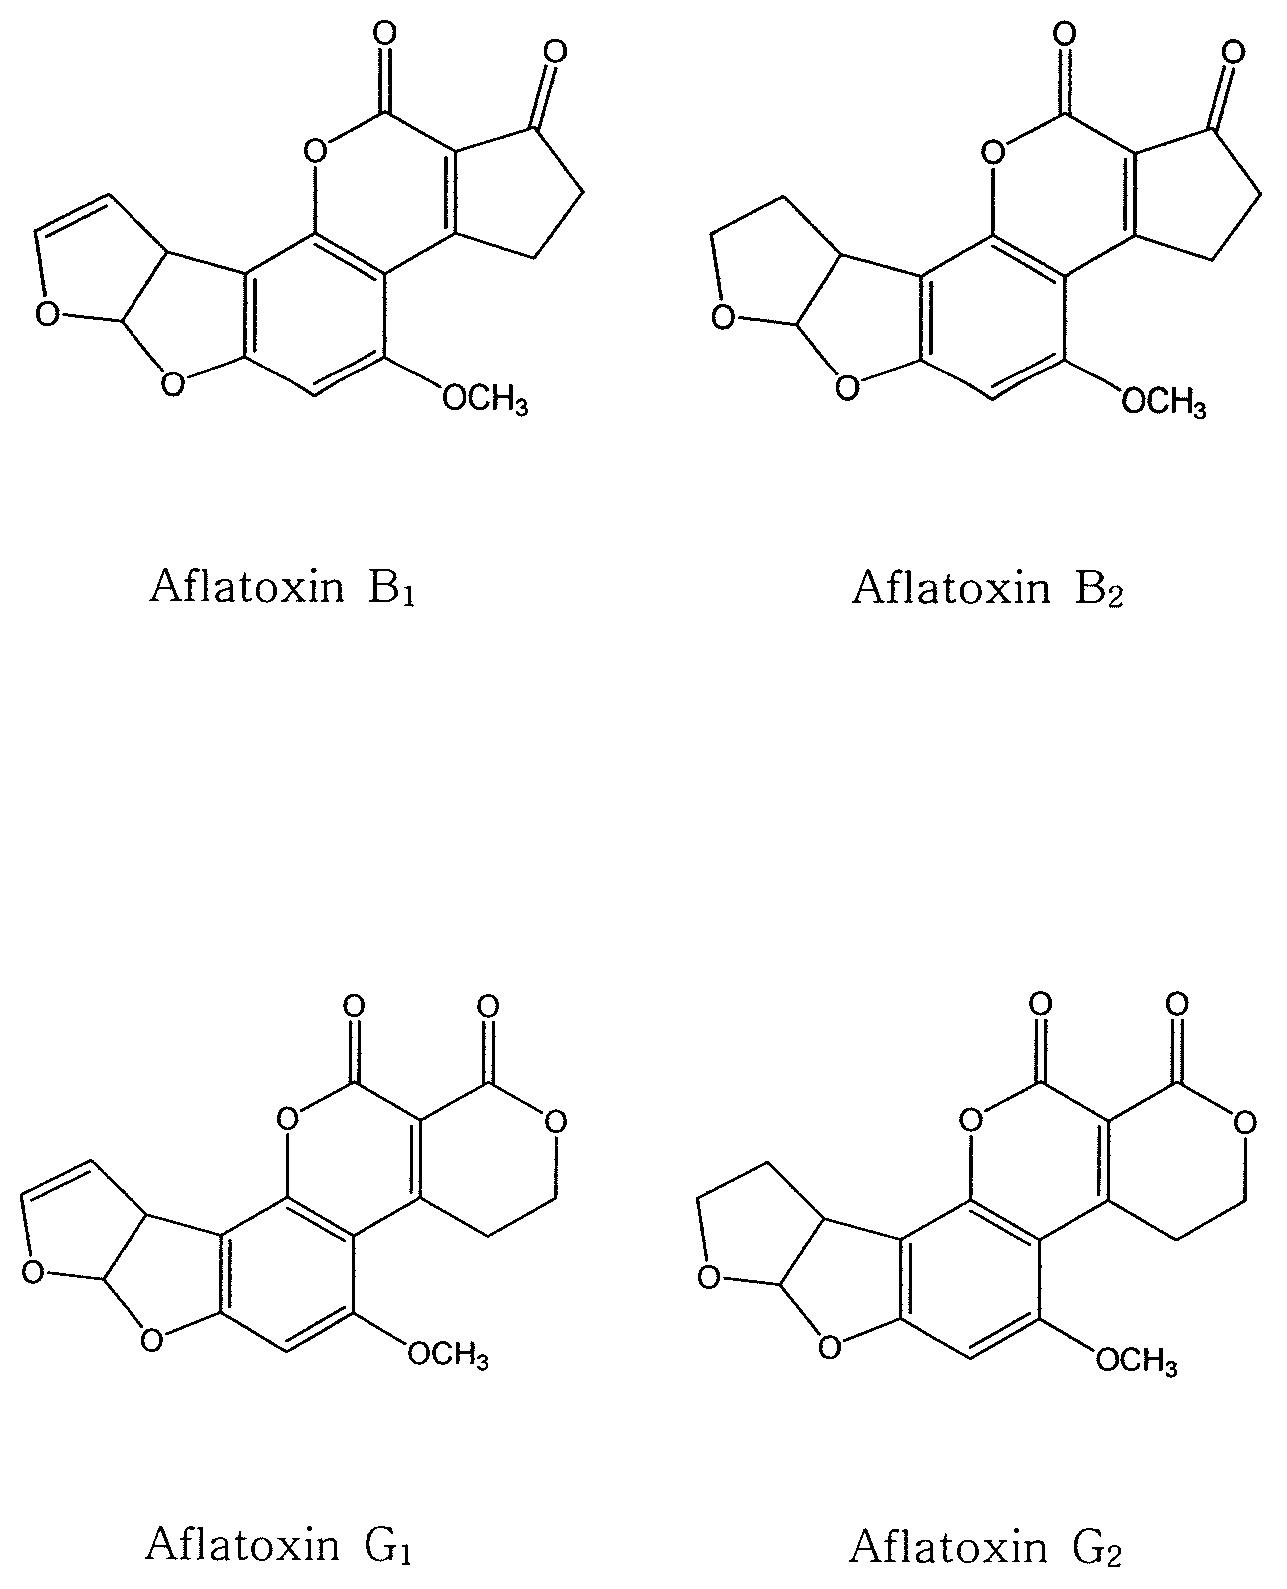 Structures of aflatoxins.